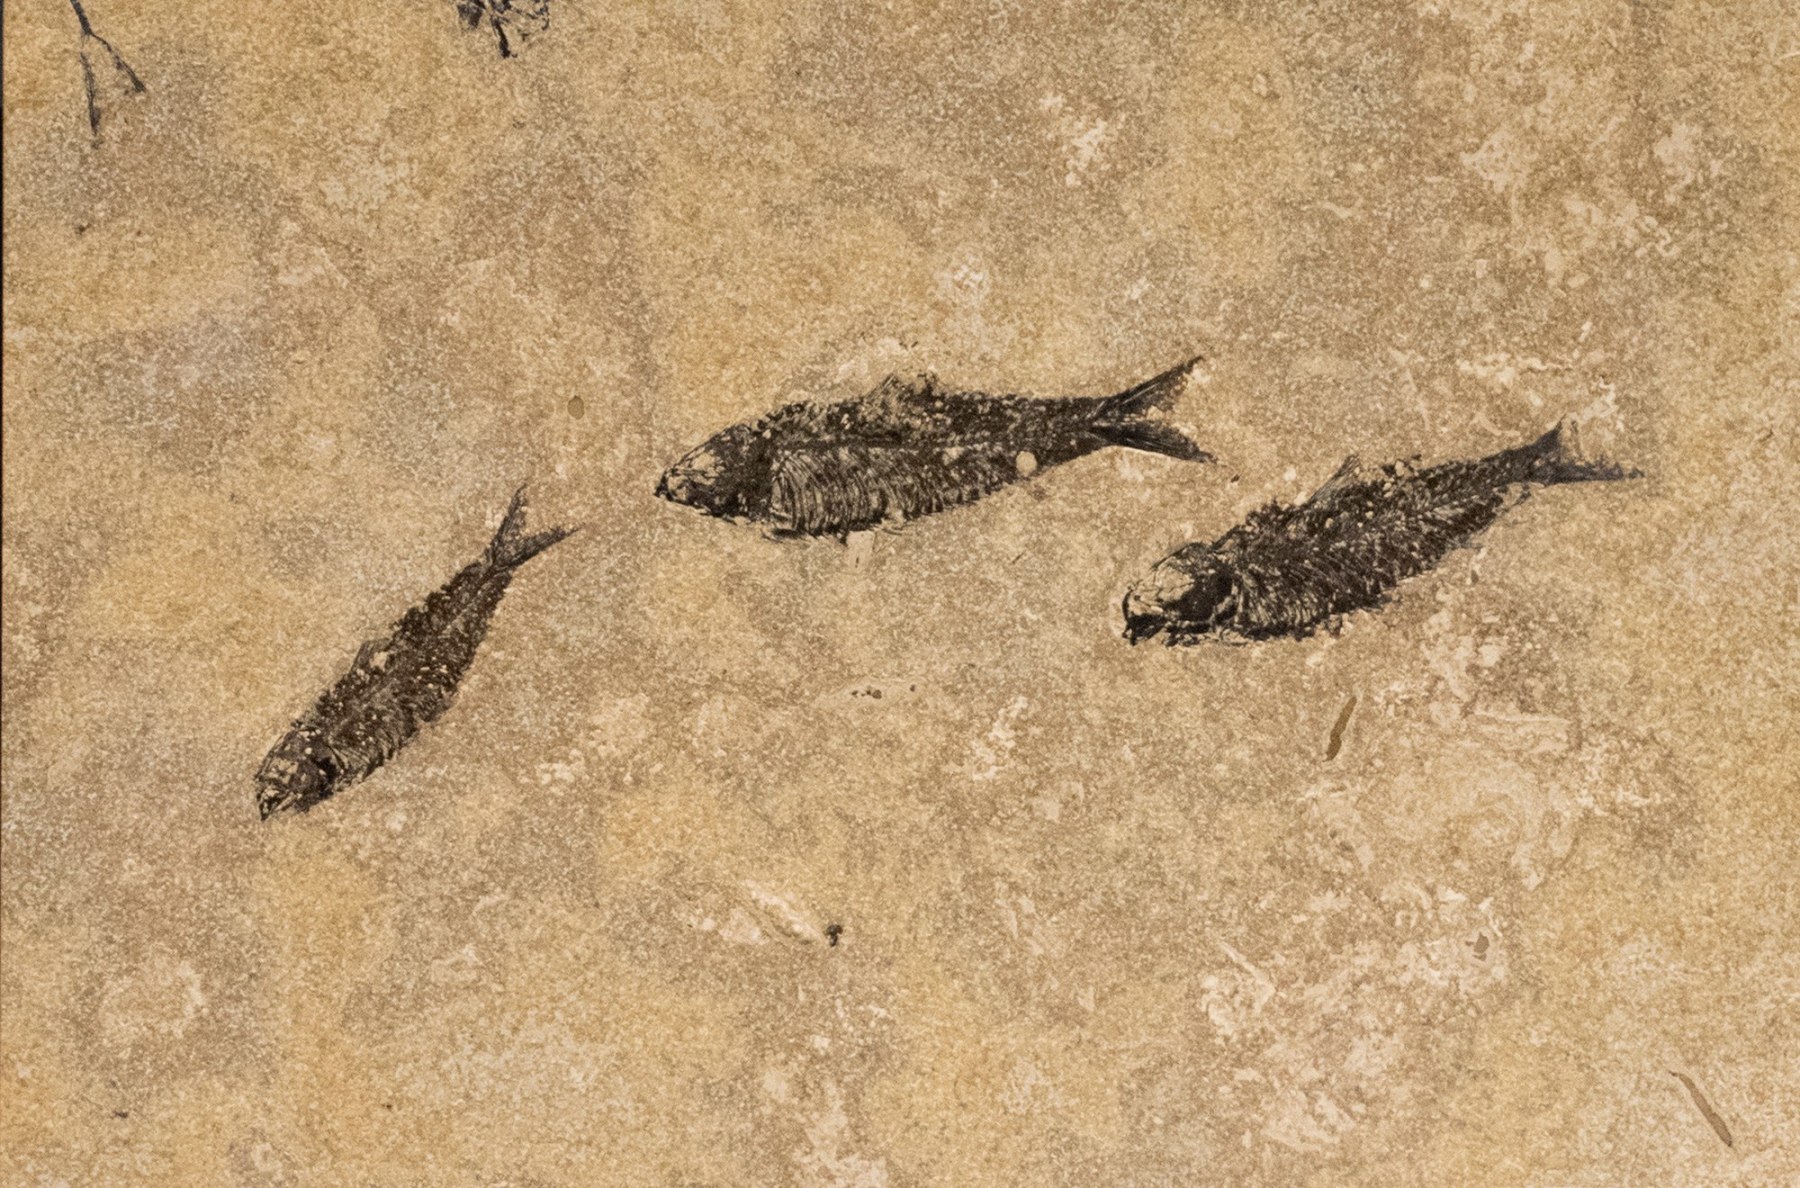 A 12" x 18" "Honed" Fossil Fish containing three Knightia fossils